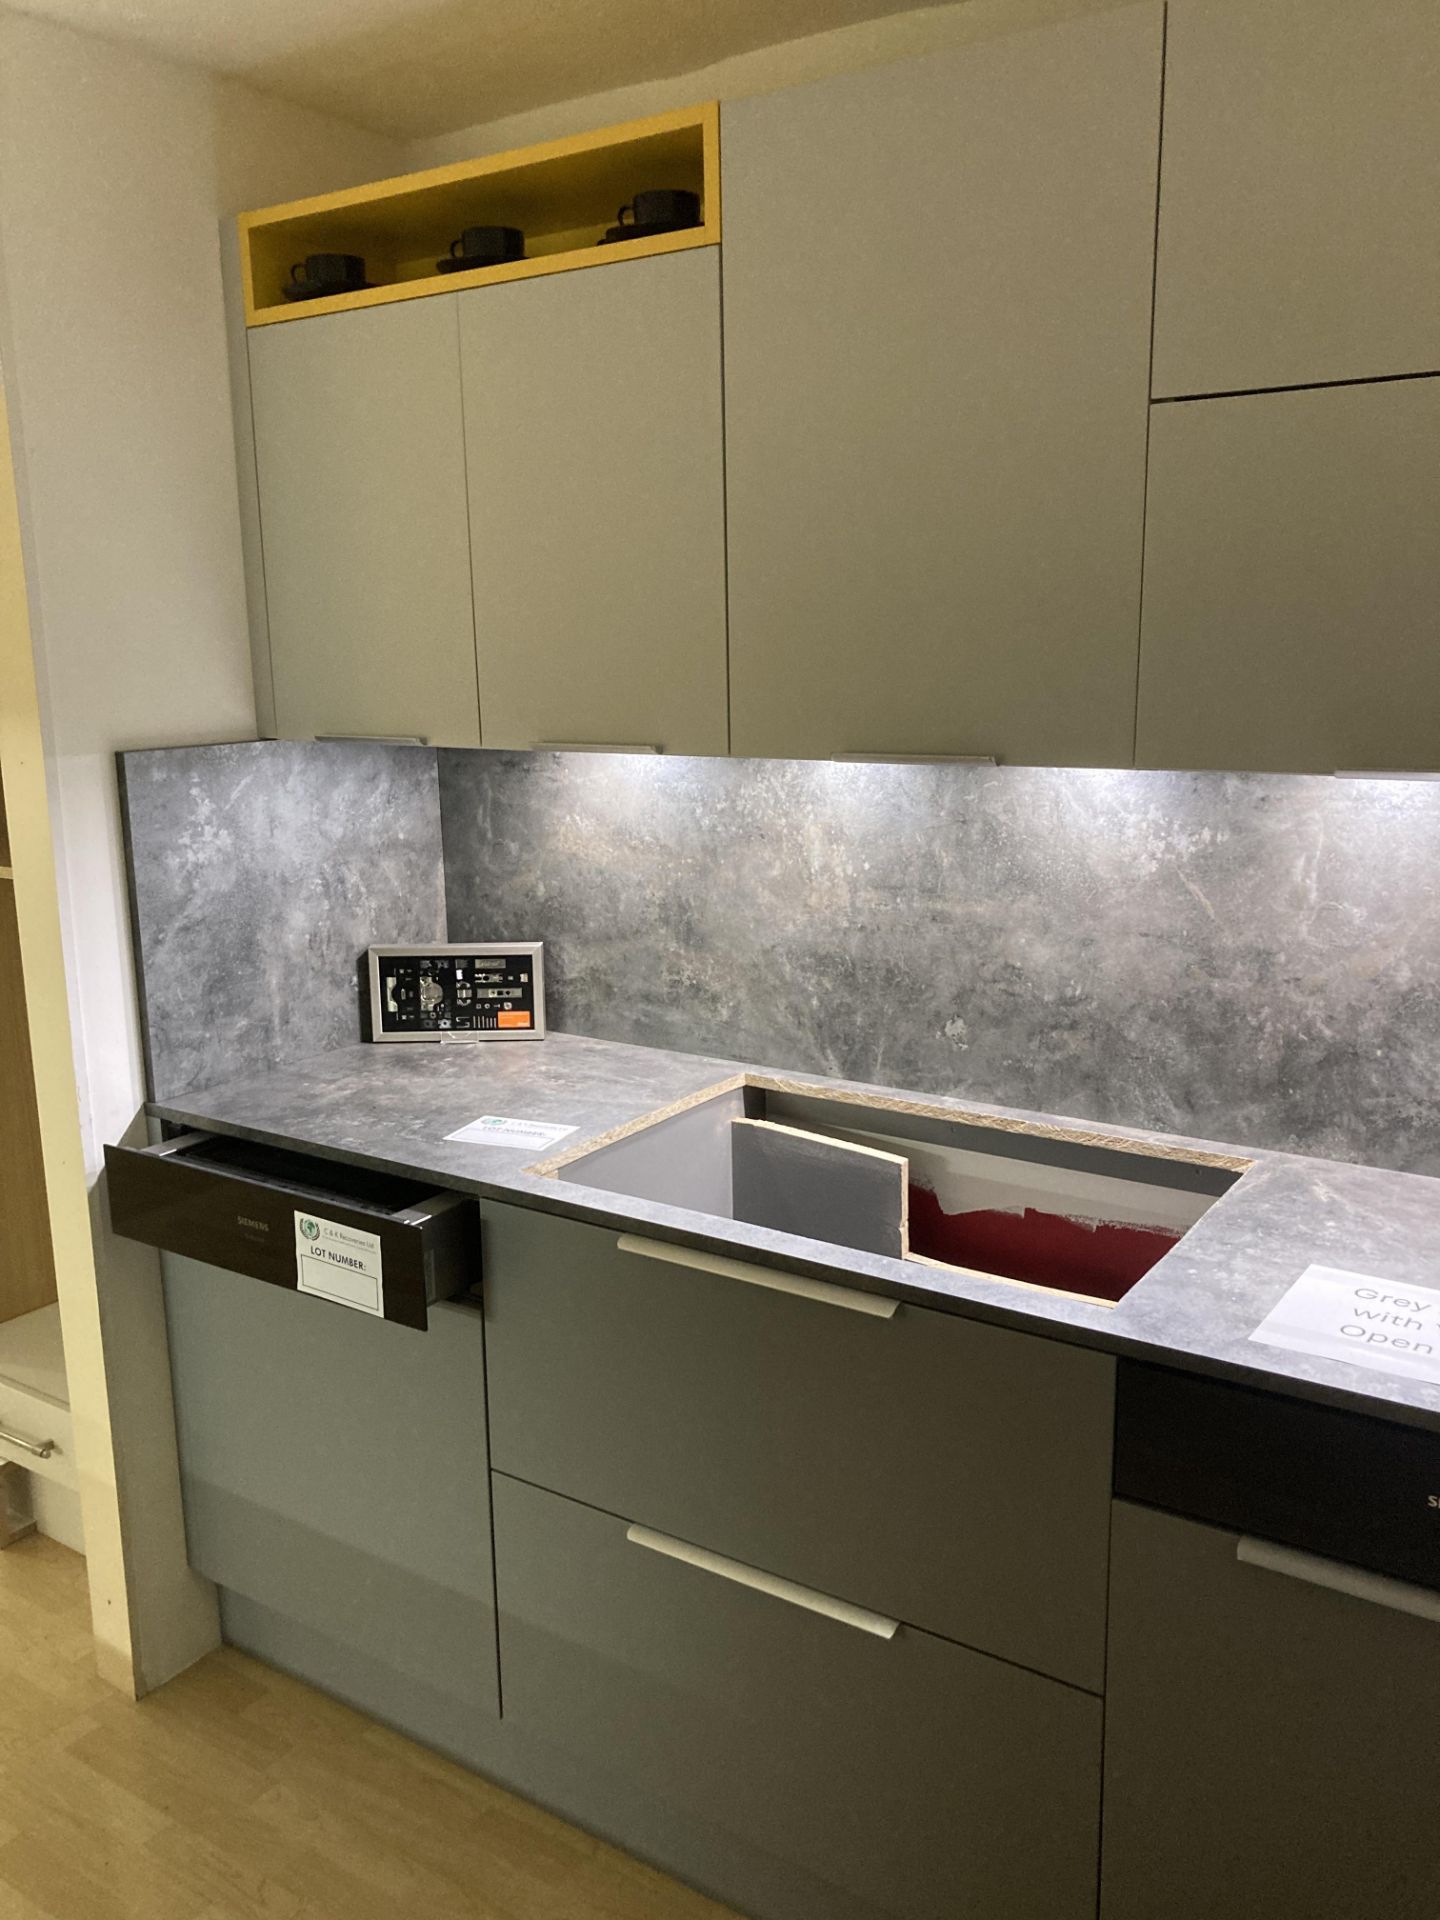 Grey with yellow open units kitchen display with appliances - Image 2 of 10